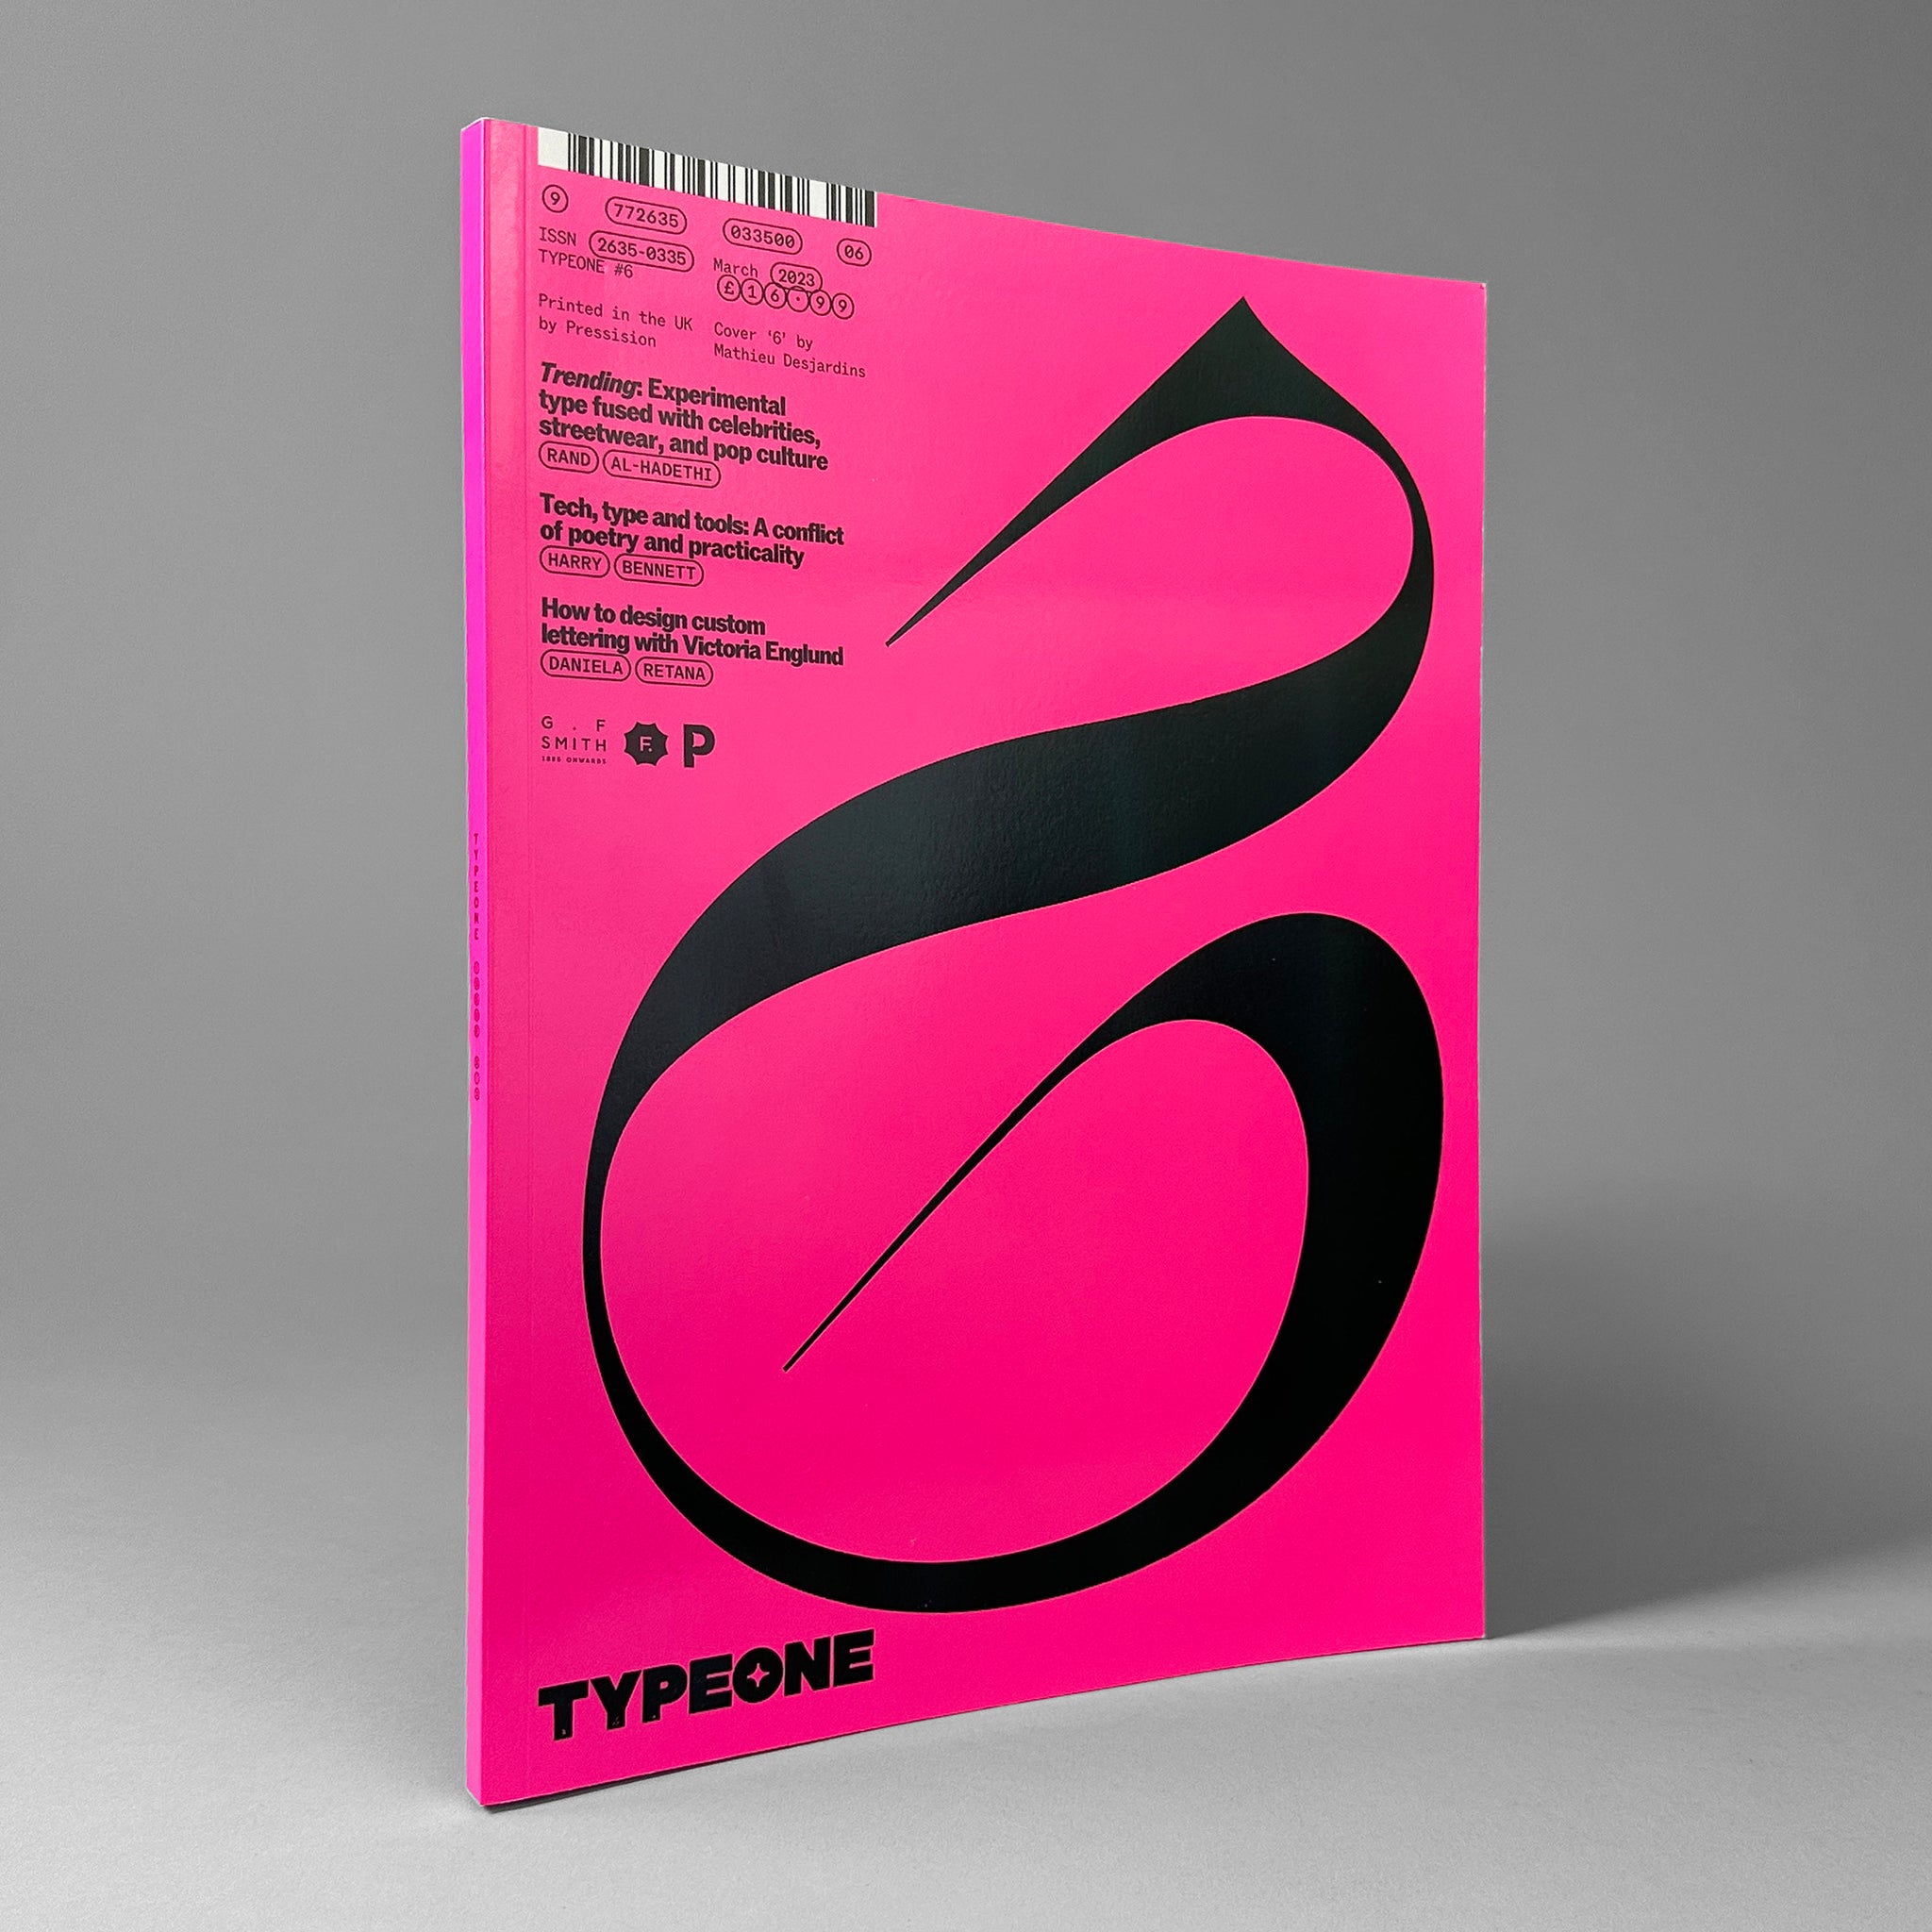 TYPEONE: Issue 06